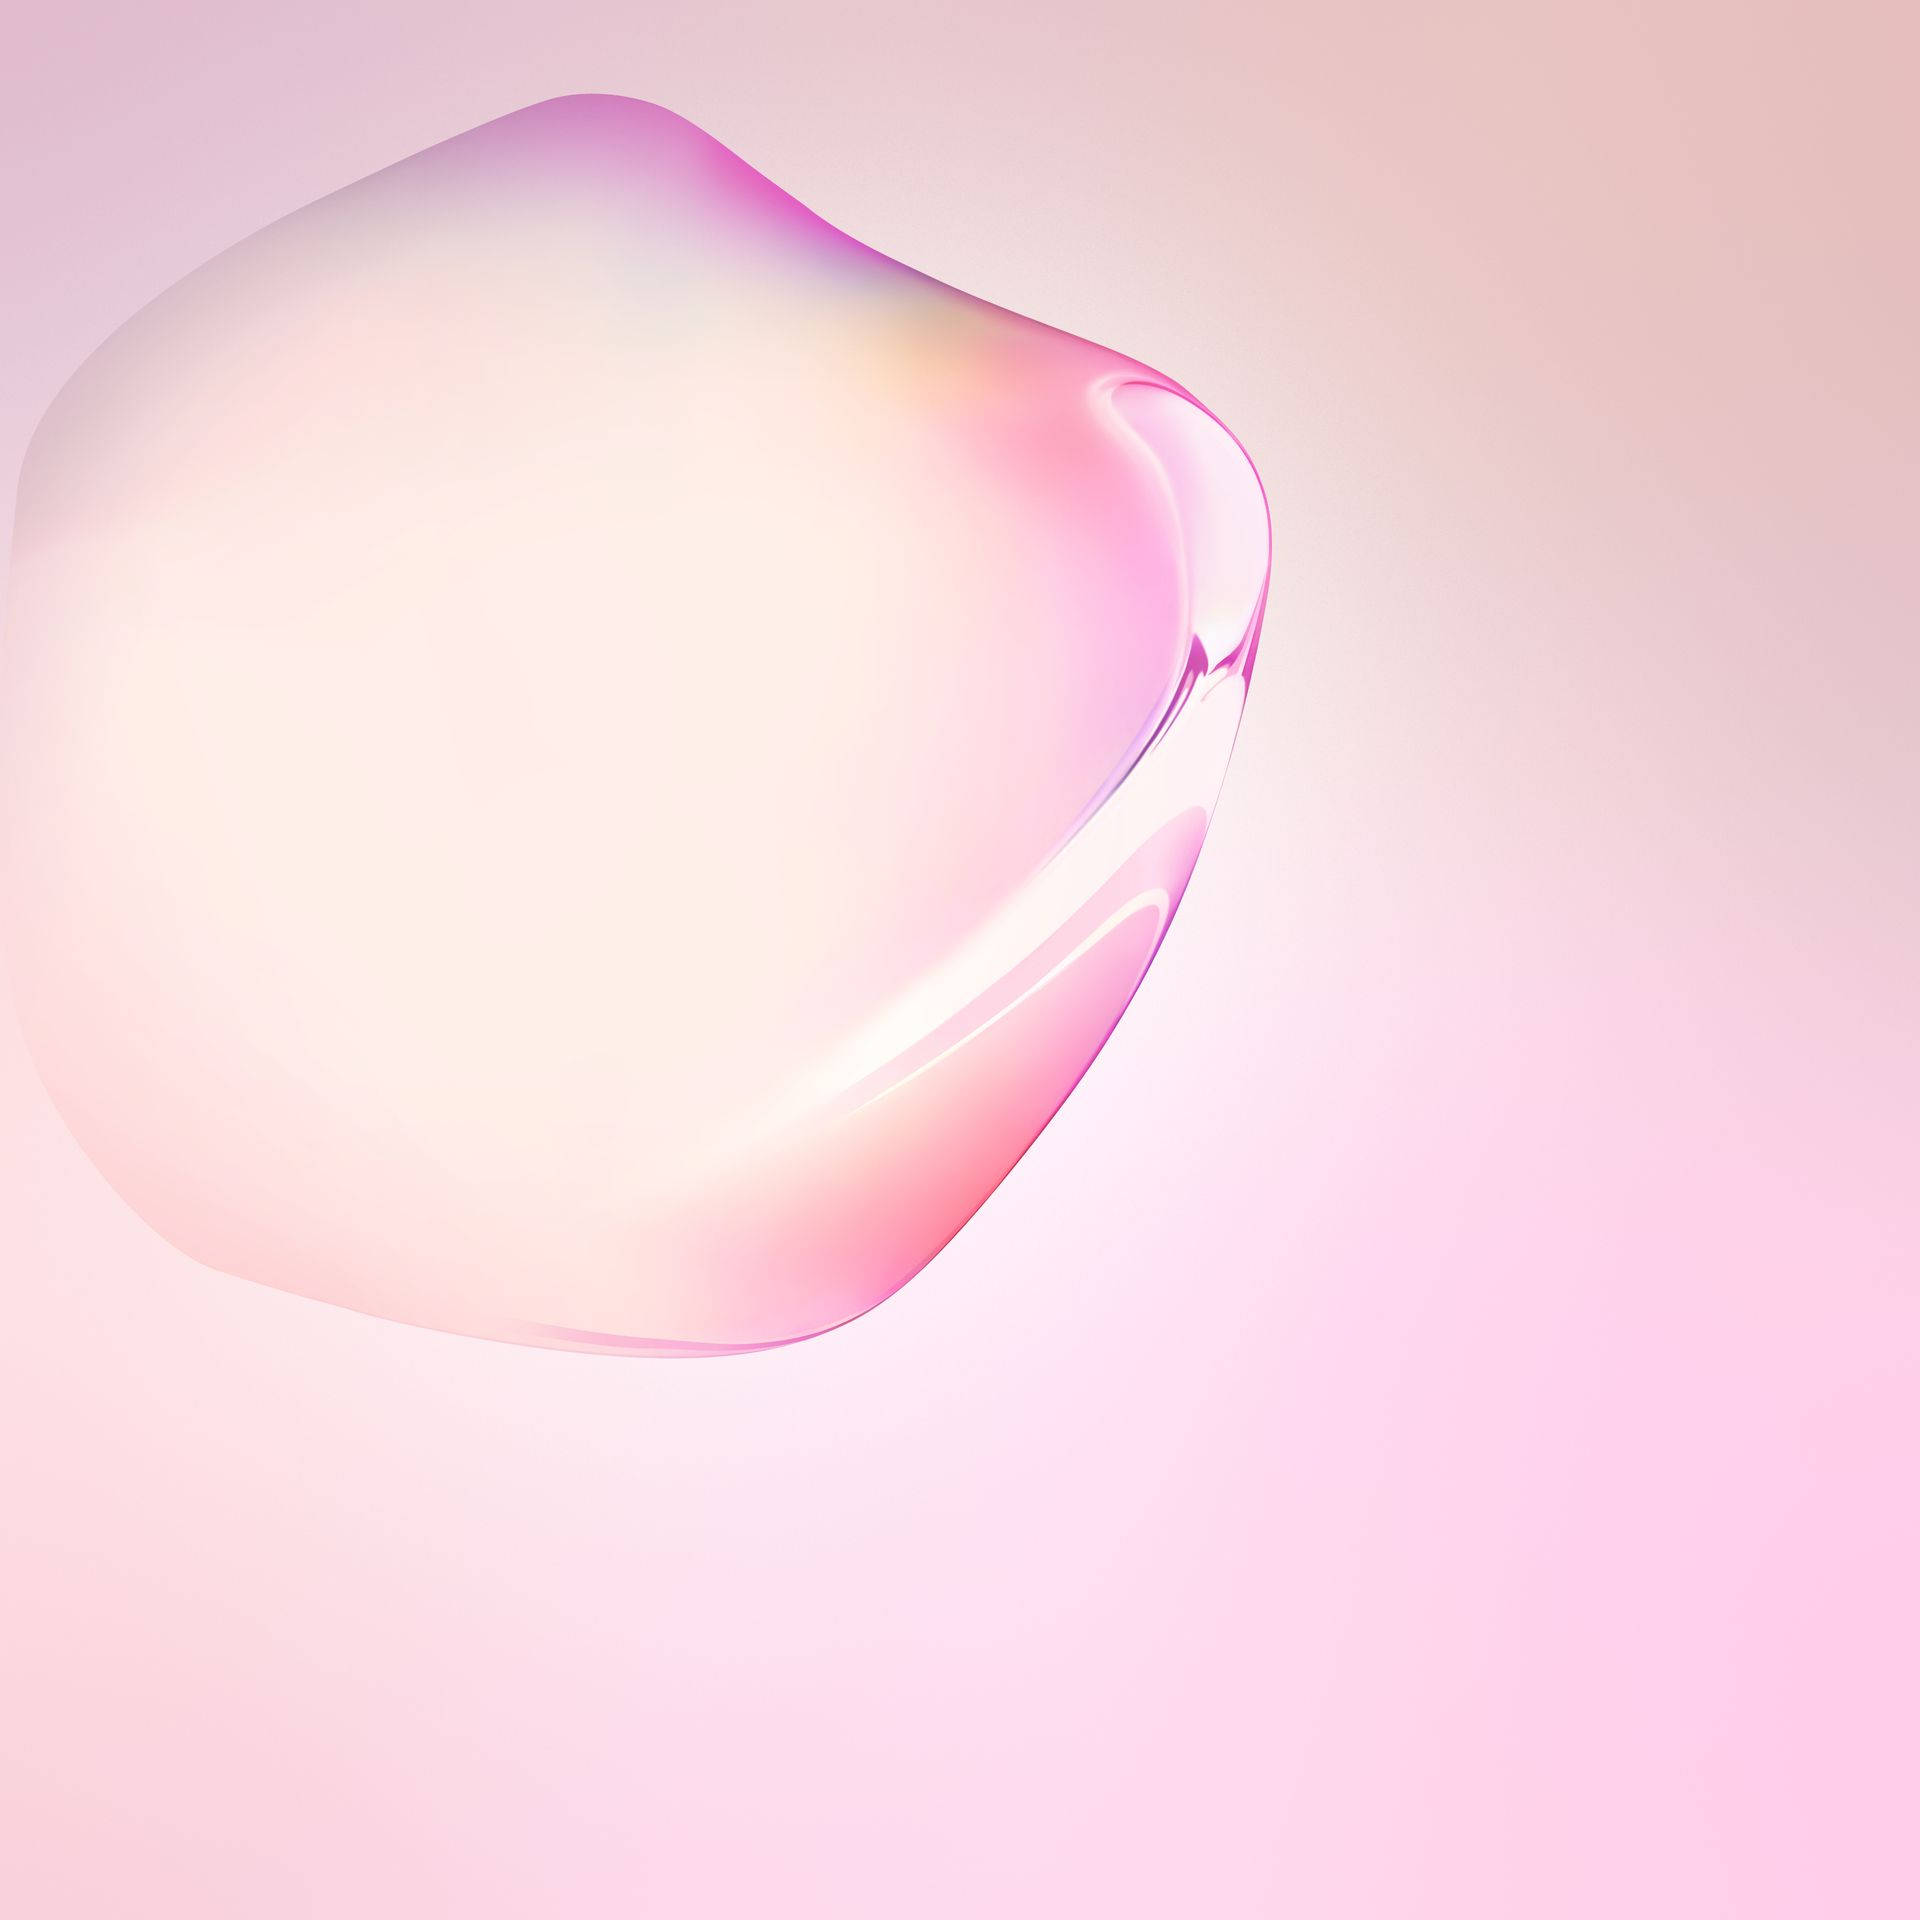 Note 10 Water Drop In Pink Background